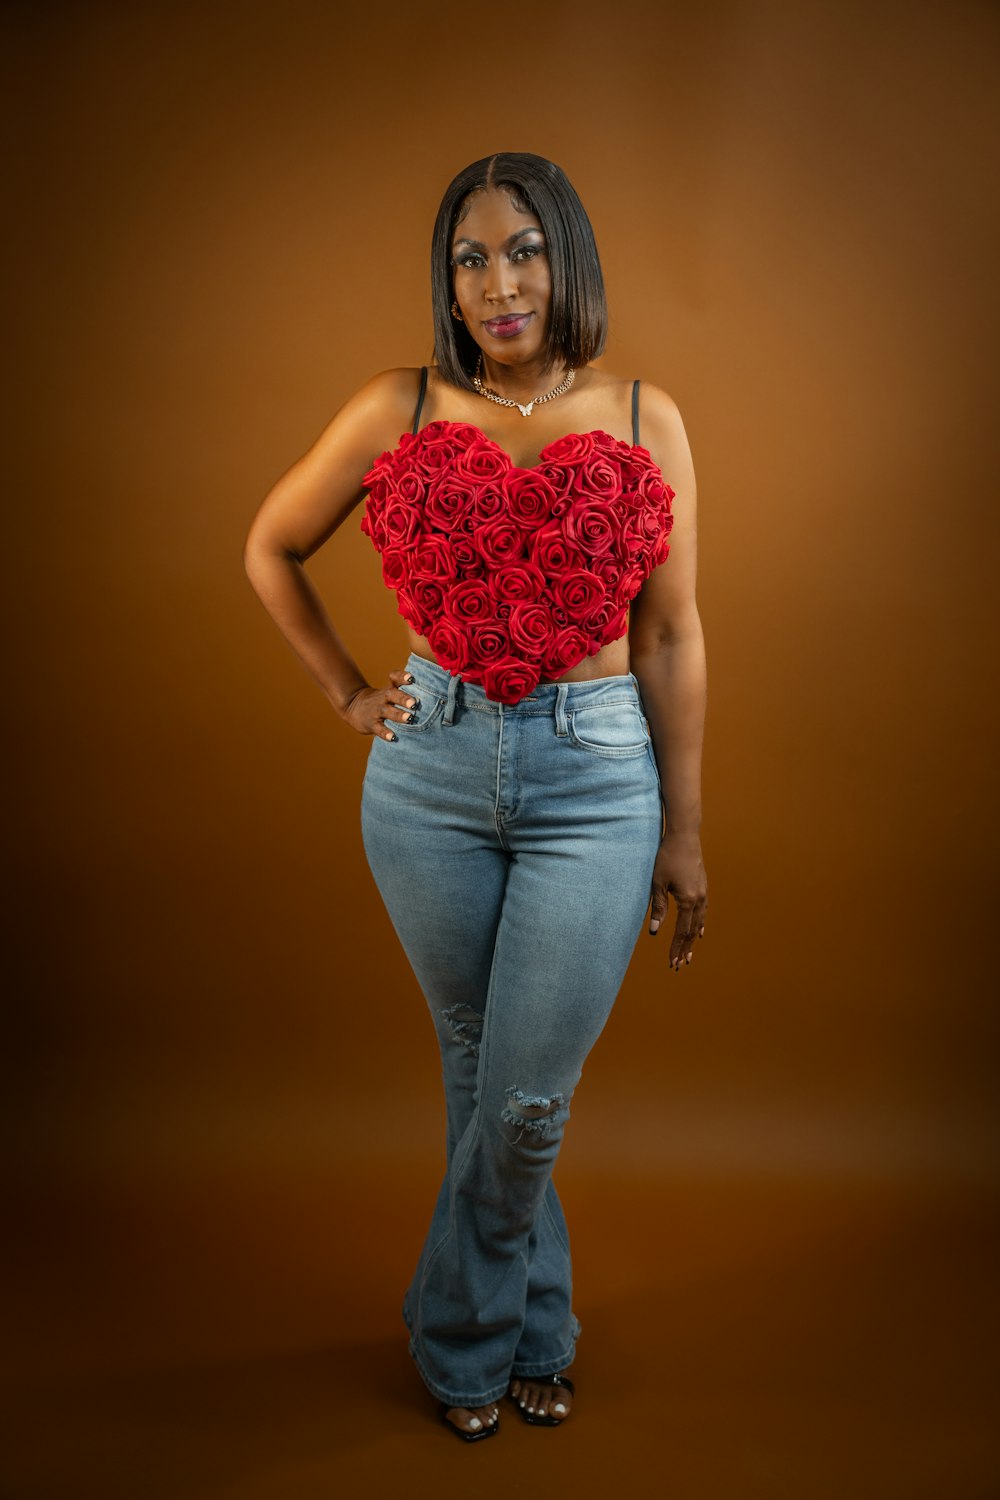 a woman wearing jeans and a red rose heart top